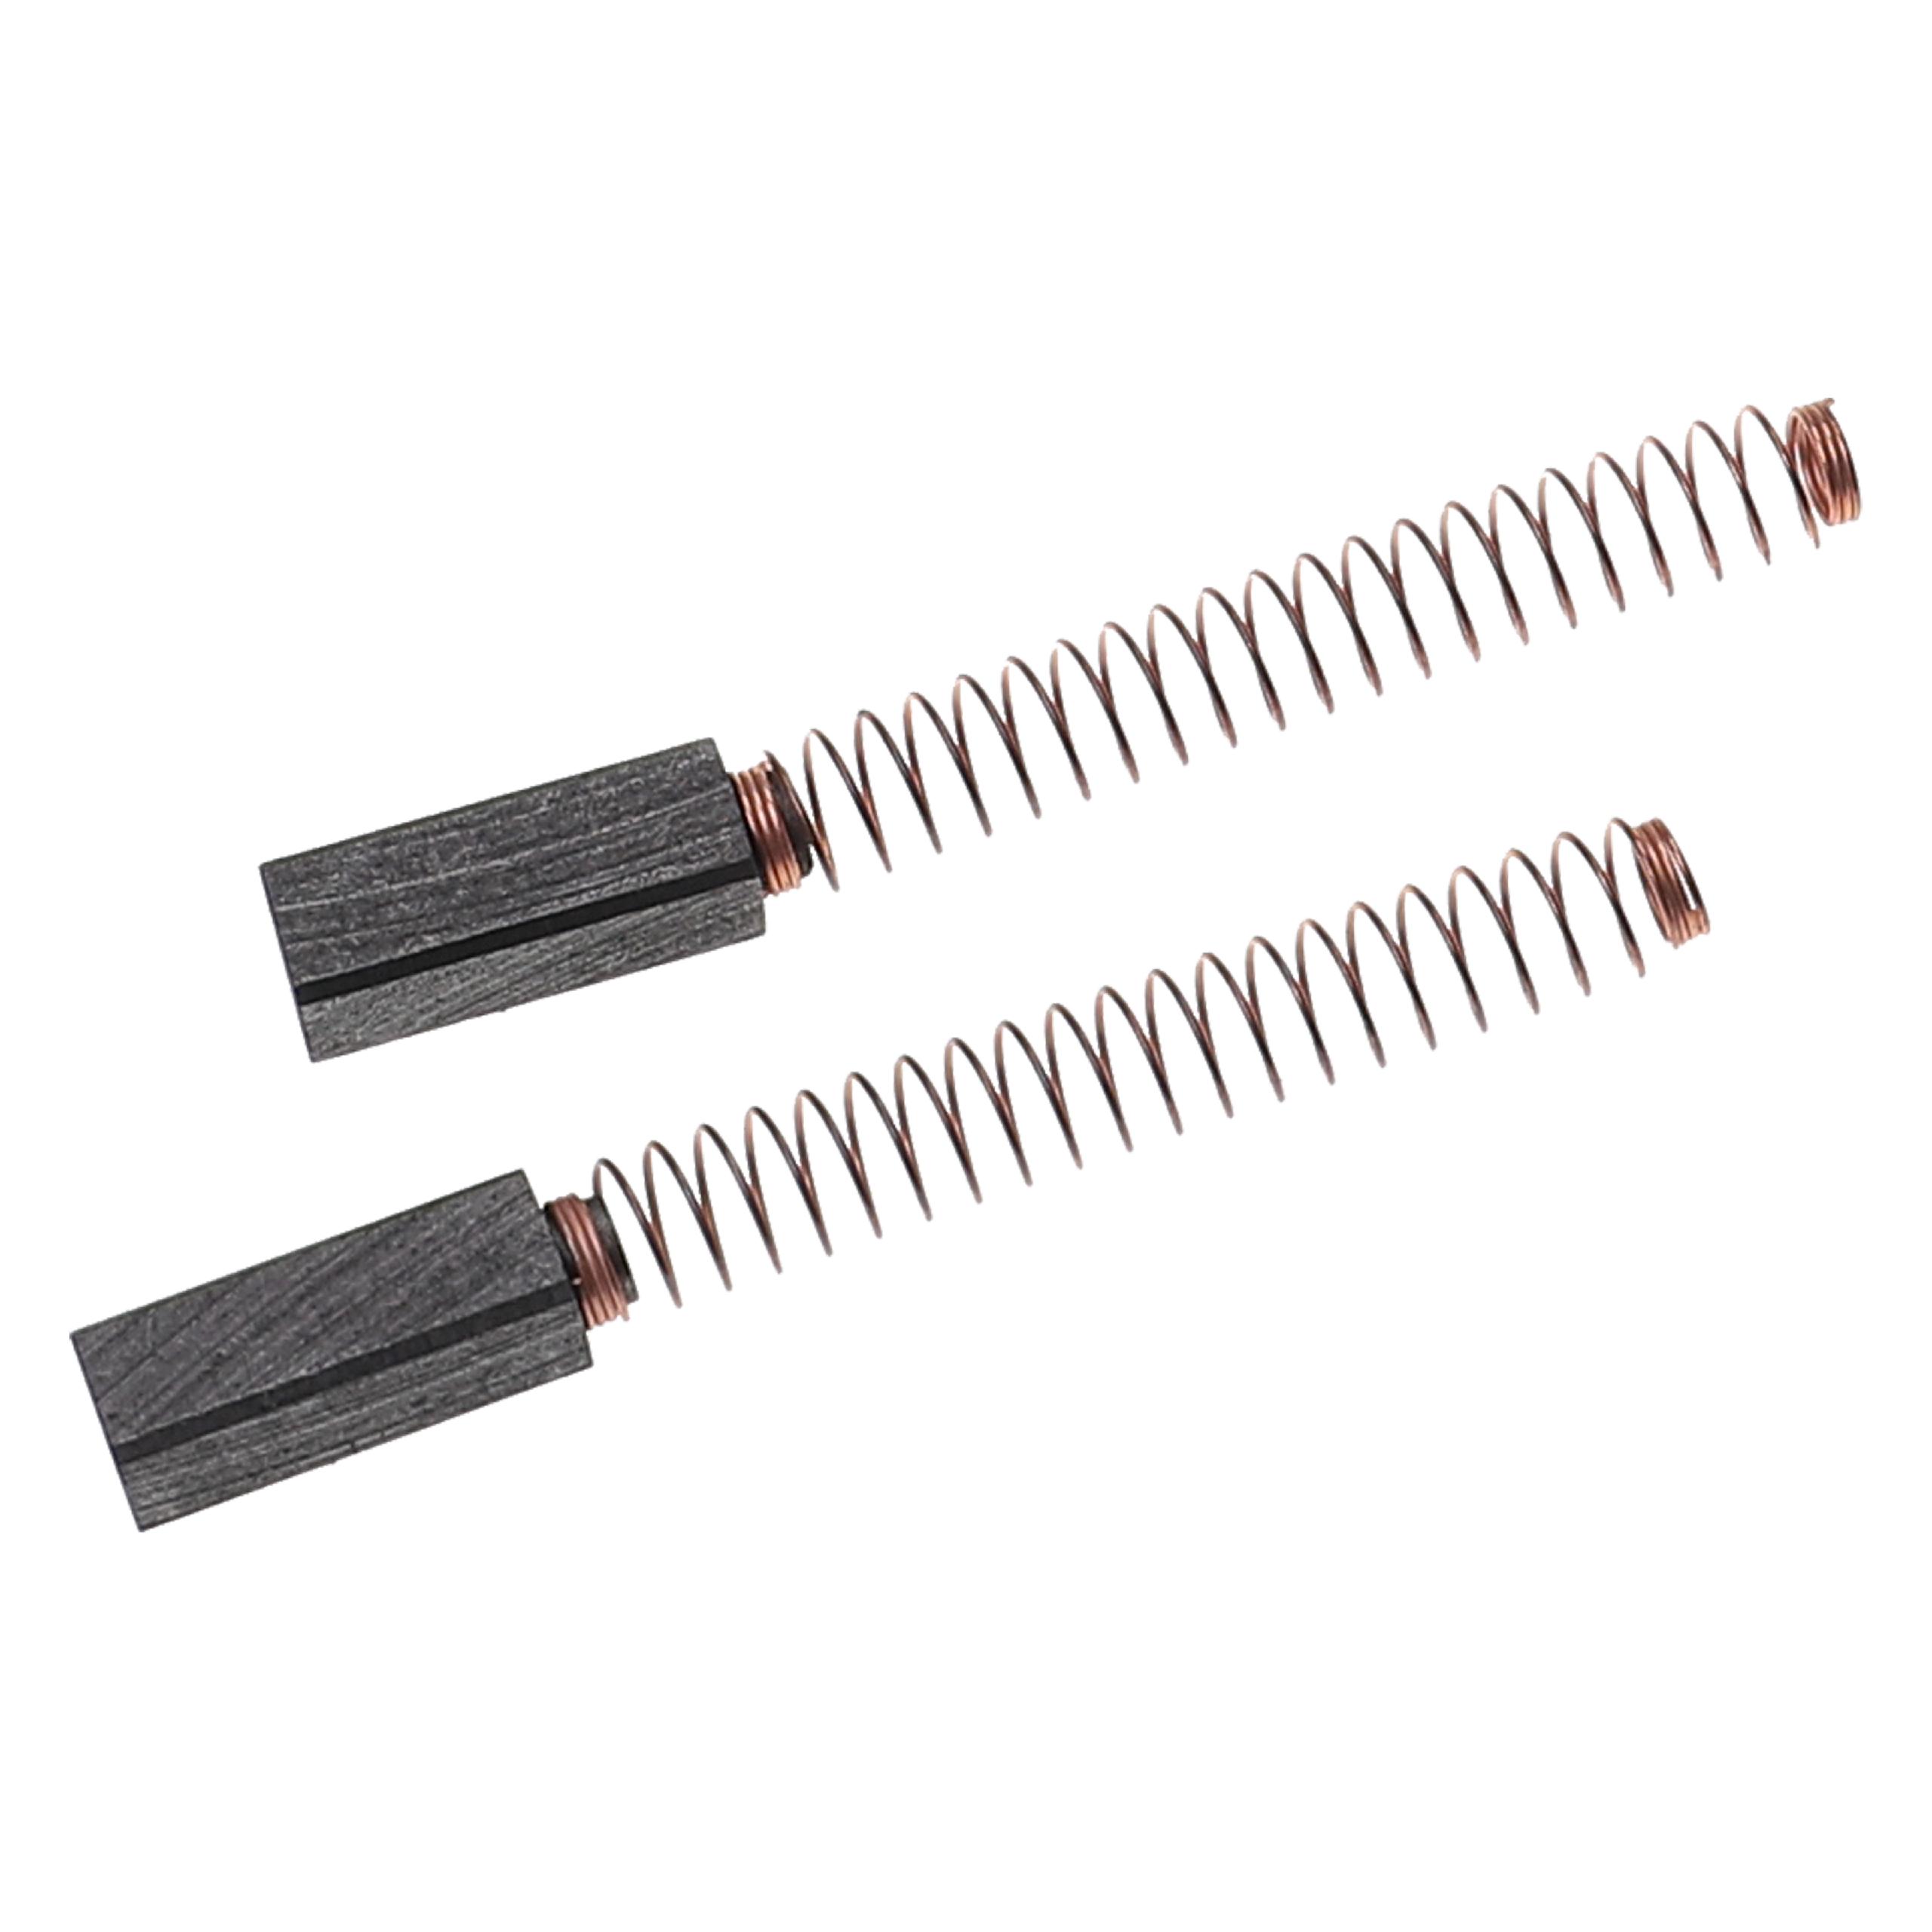 2x Carbon Brush as Replacement for KitchenAid 1938379, 3184115 Electric Power Tools + Spring, 19 x 6mm